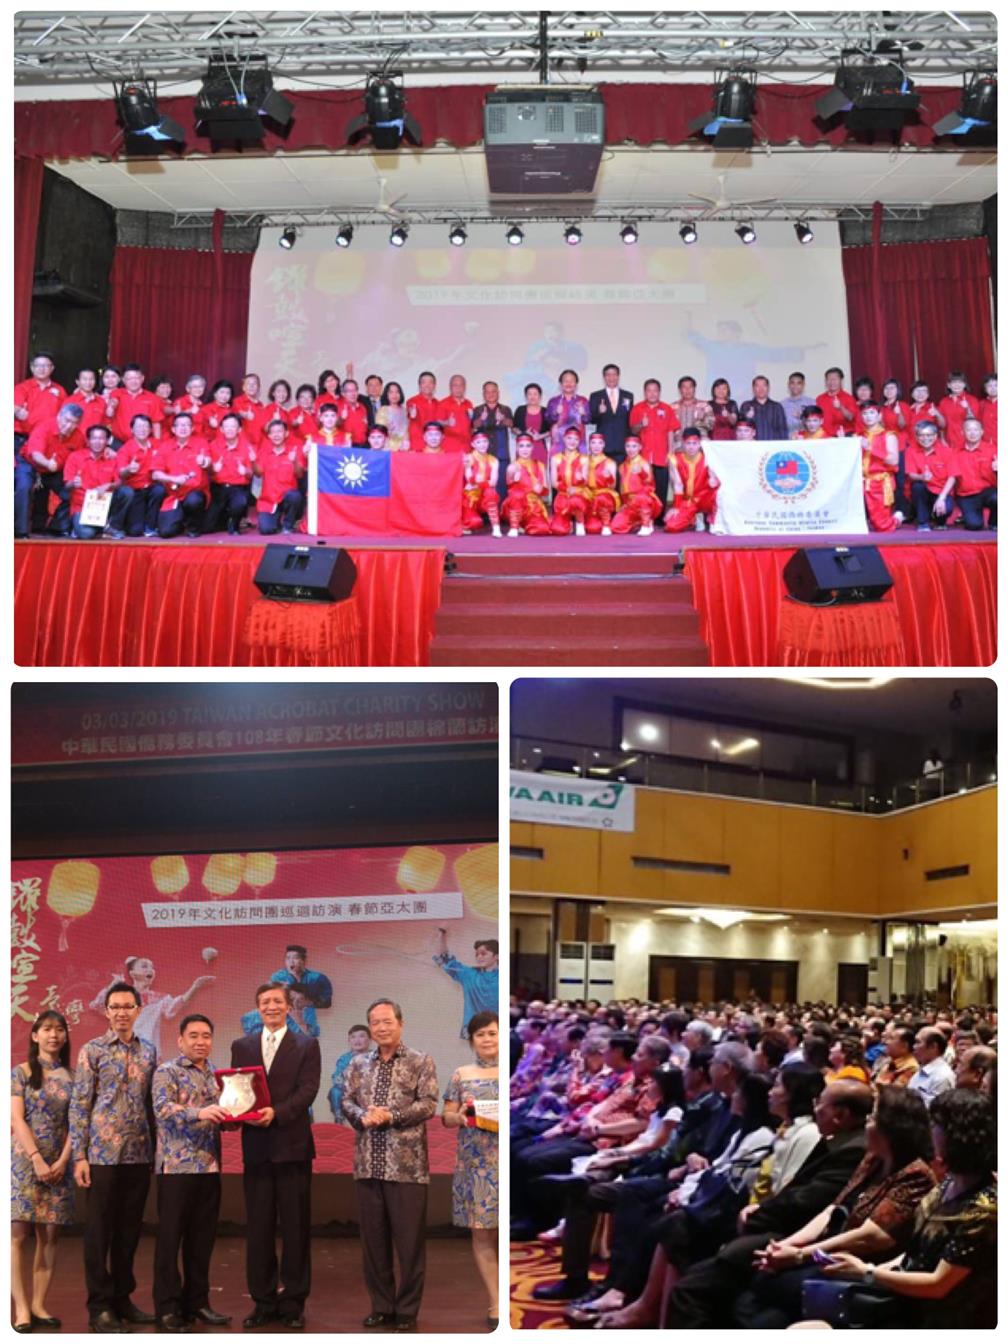 Deputy Minister Kao Chien-chih of the OCAC led the 2019 Lunar New Year Goodwill Mission Asia-Pacific Tour; the tour involved performances in 13 cities in eight countries and was a resounding success.